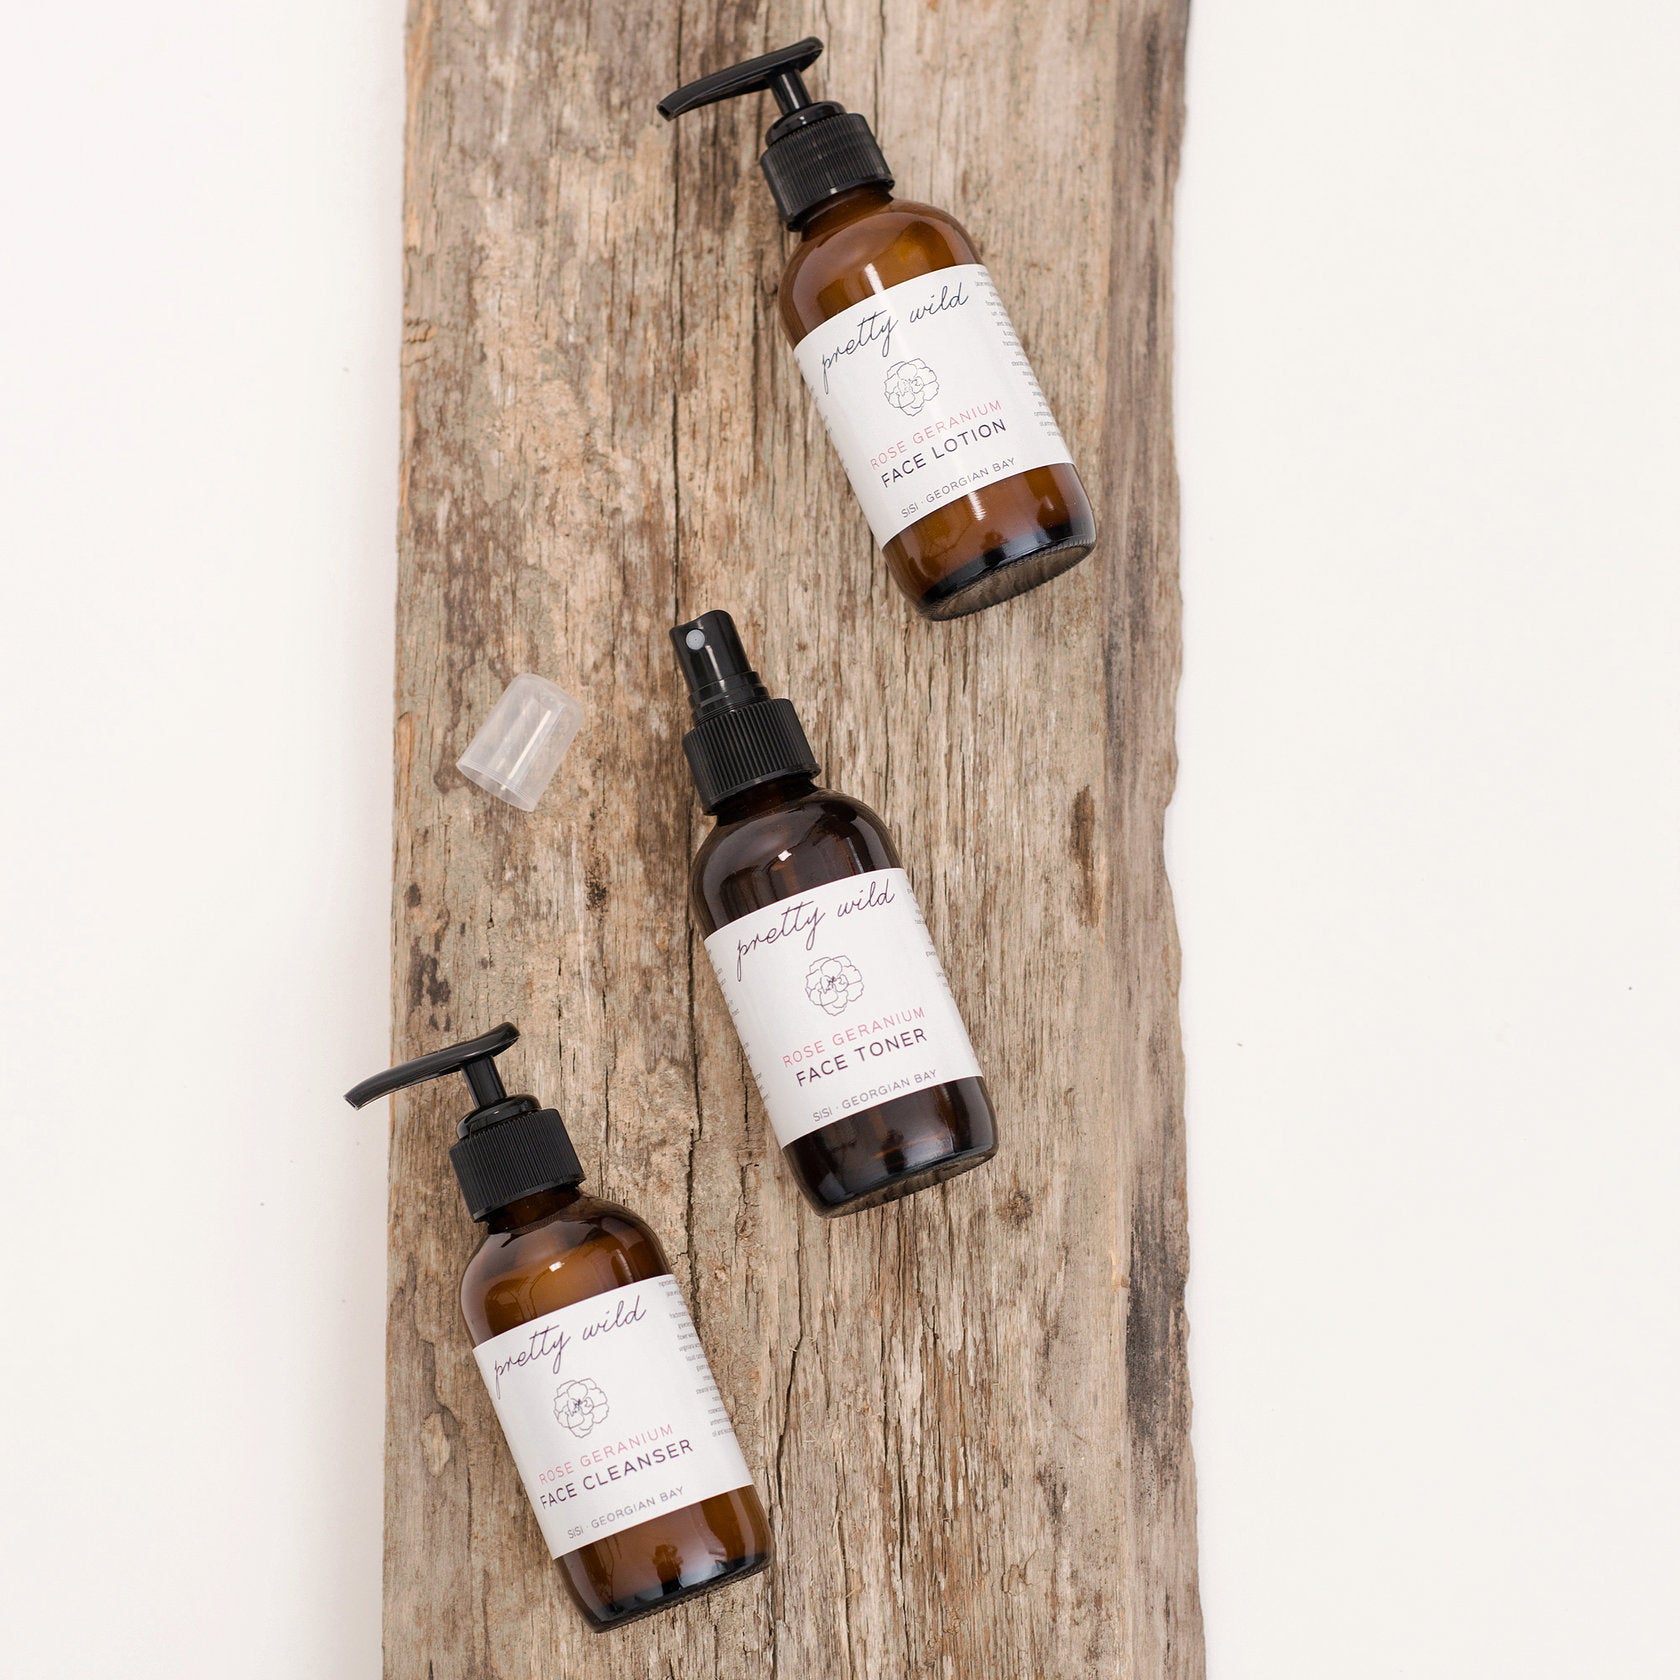 Natural beauty care products - SiSi Georgian Bay "pretty wild" face care essentials - cleanser, toner and lotion on a rustic wooden board on a creamy white background